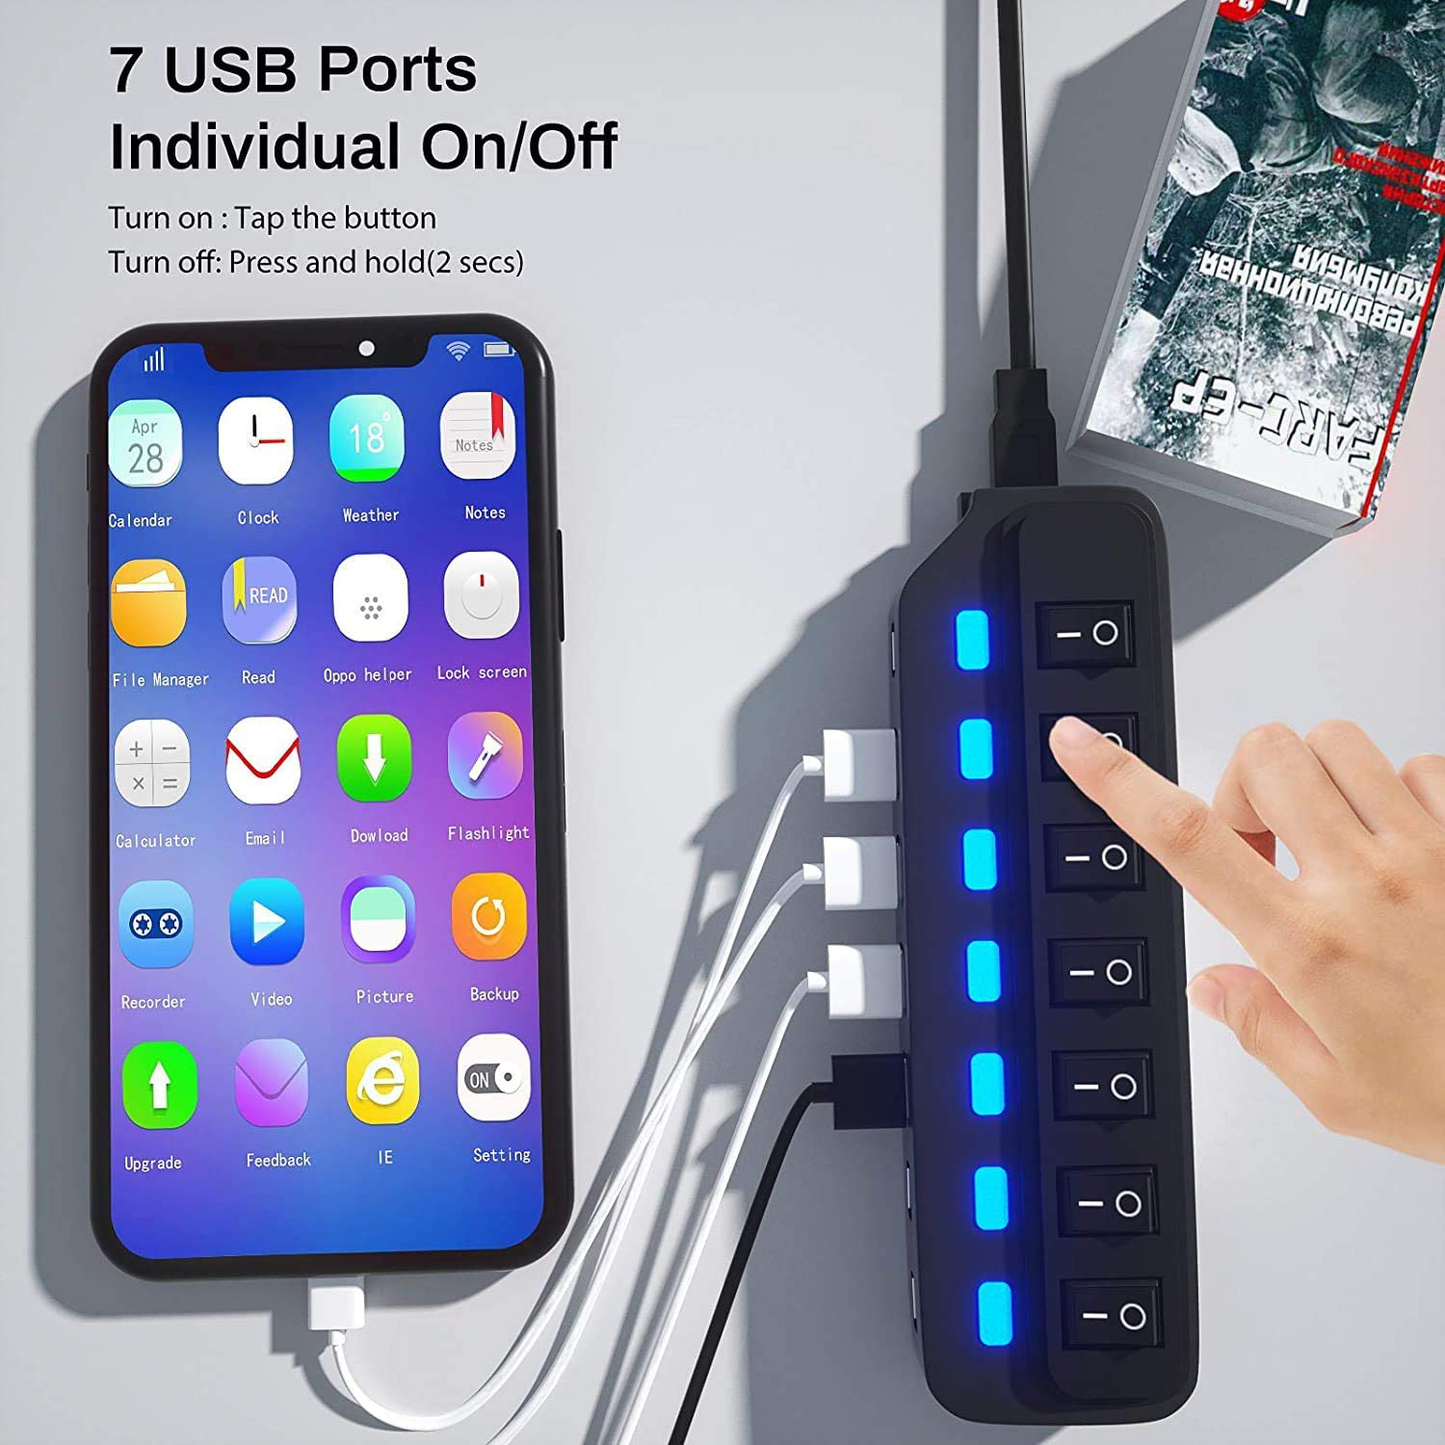 USB Hub 3.0 Splitter,7 Port USB Data Hub with Individual On/Off Switches and Lights for Laptop, PC, Computer, Mobile HDD, Flash Drive and More